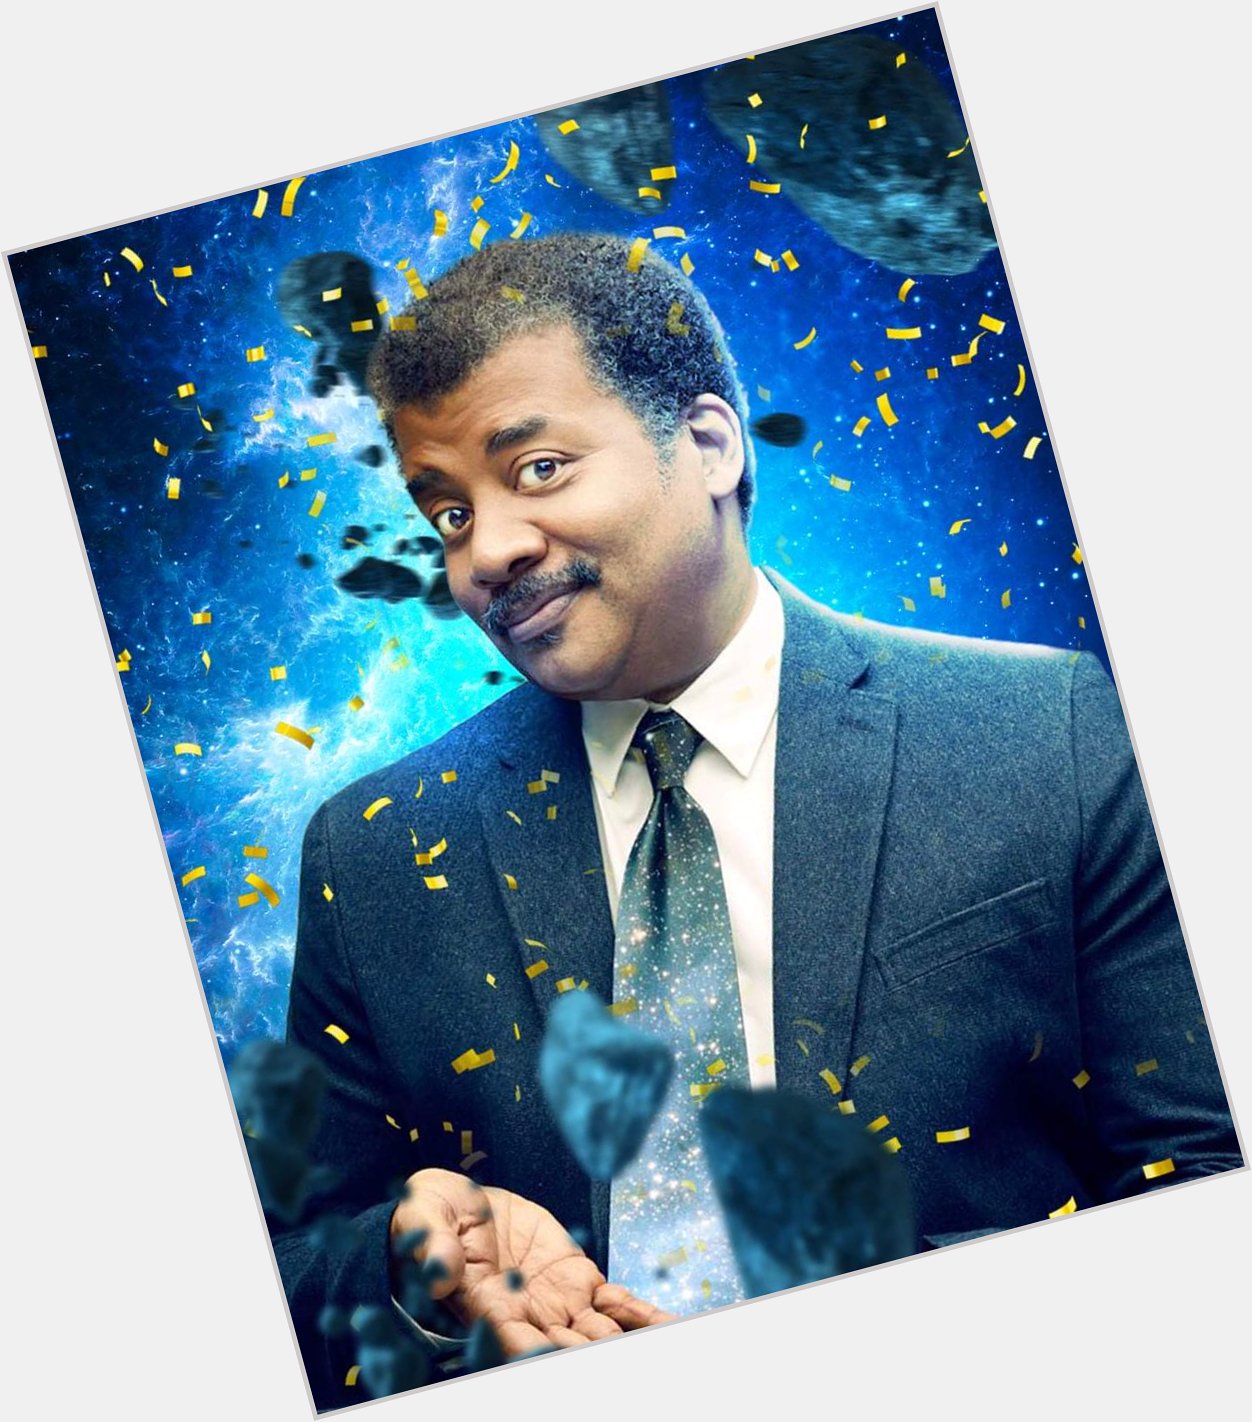 Cue the confetti, it\s Neil\s birthday! Happy birthday to our favorite Astrophysicist, Neil deGrasse Tyson 